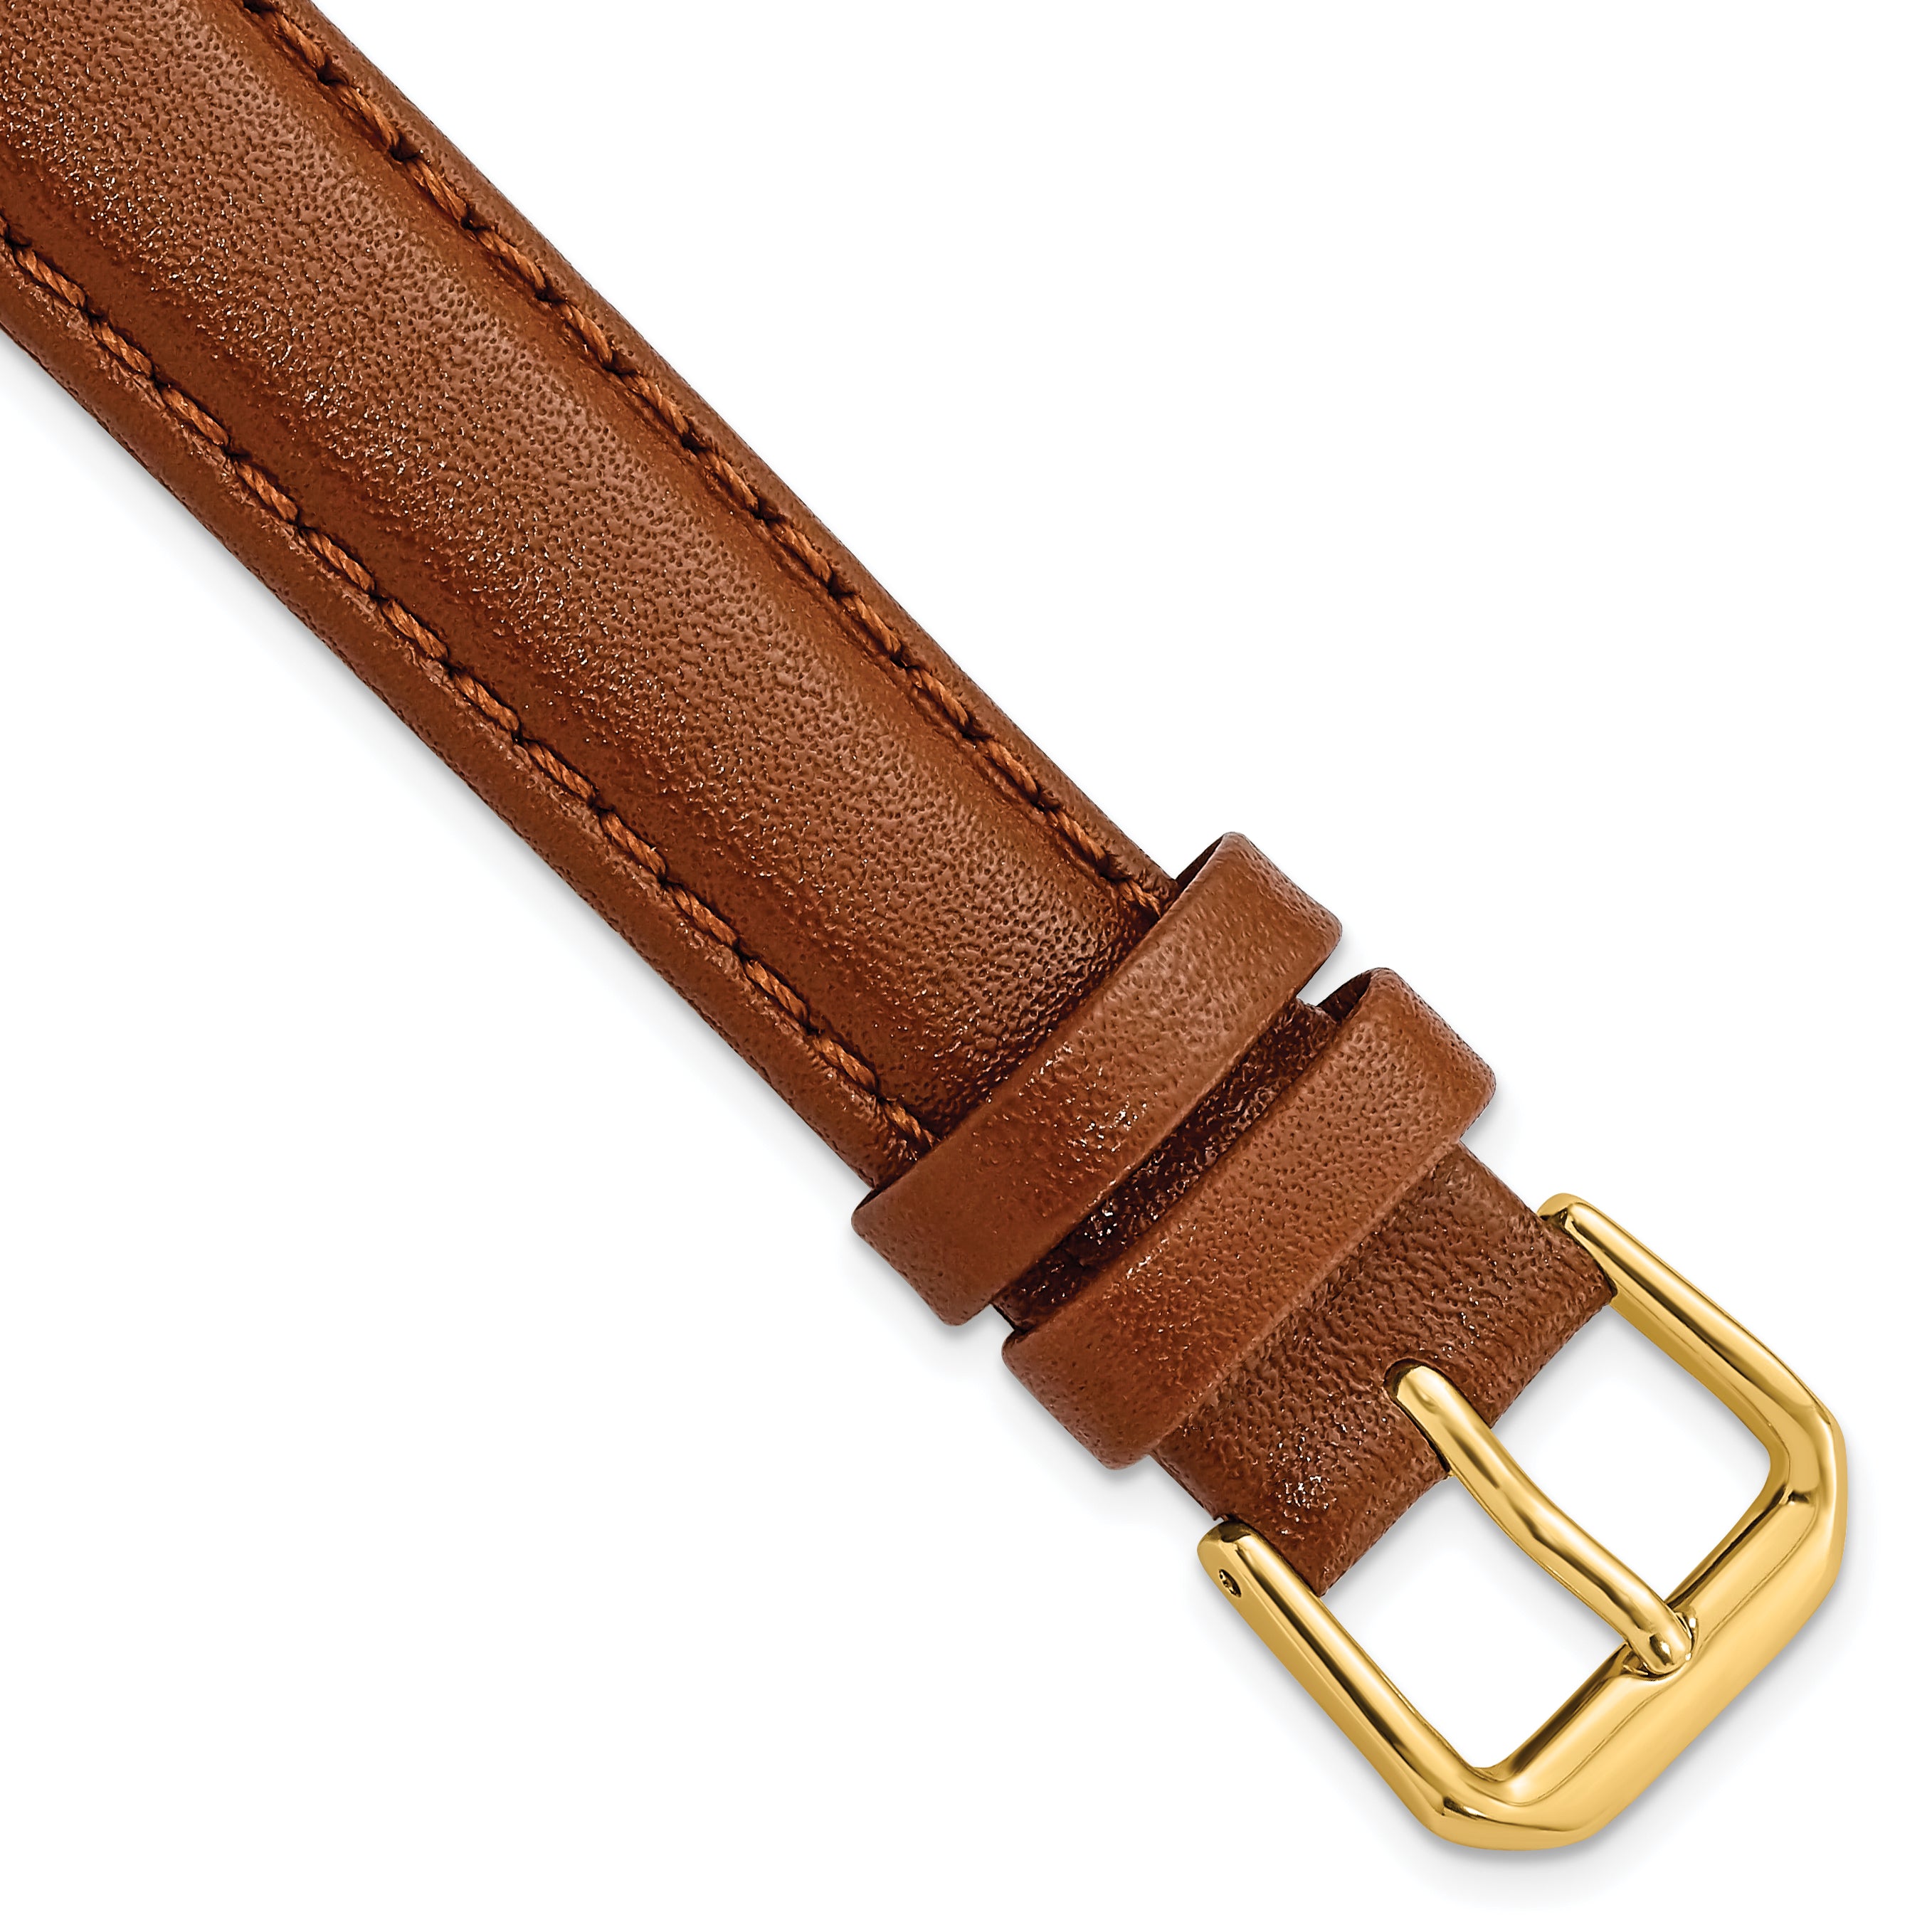 DeBeer 15mm Havana Smooth Leather with Gold-tone Buckle 7.5 inch Watch Band